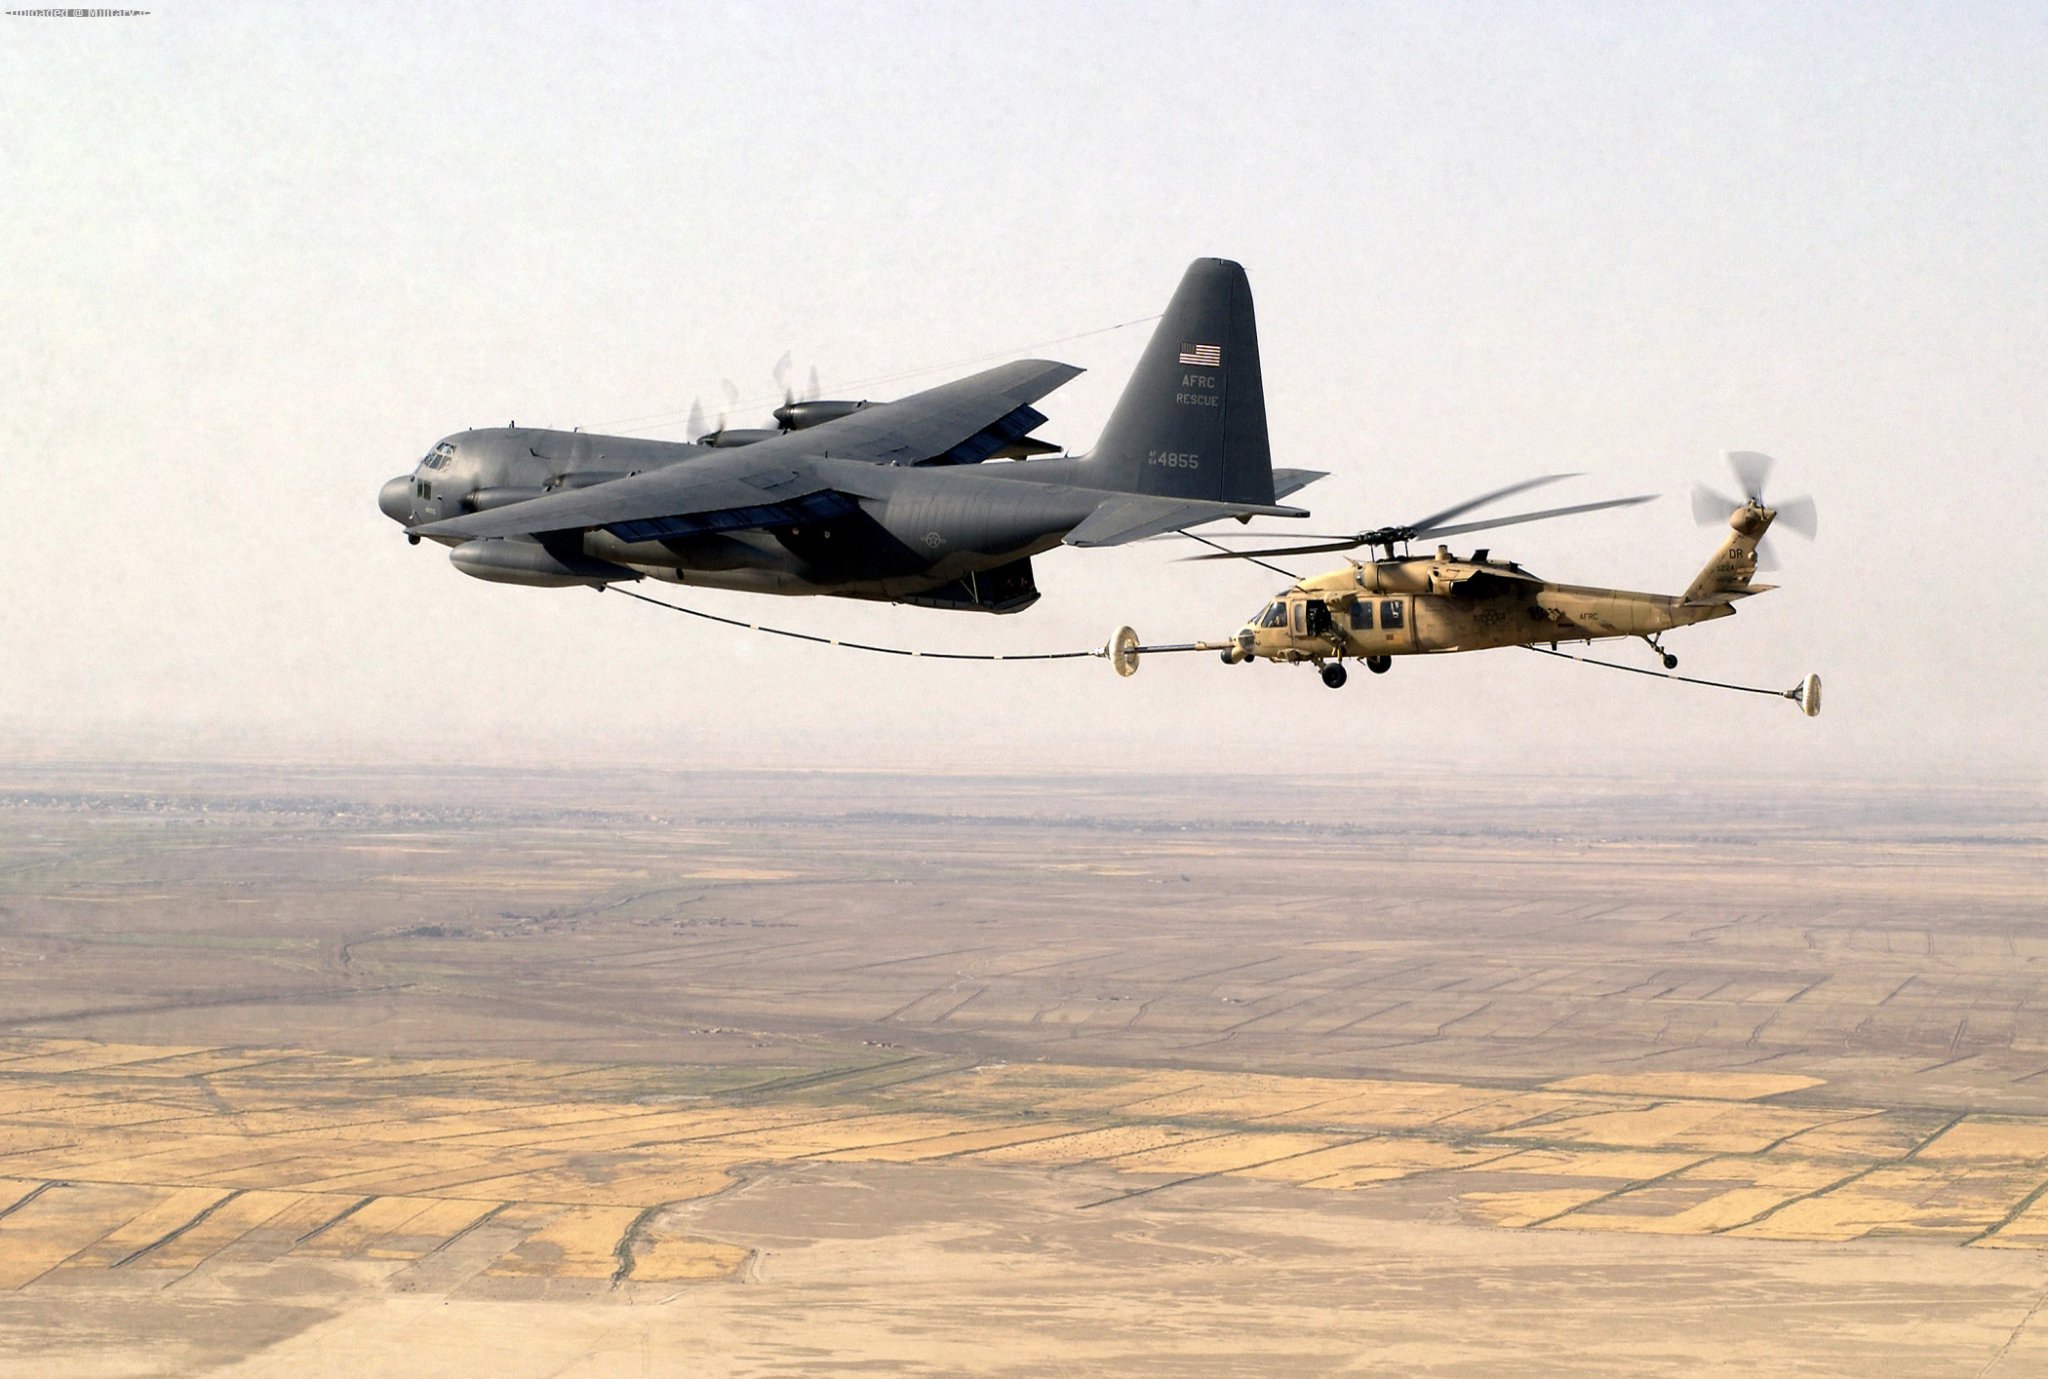 Pave_Hawk_refueling_from_a_HC-130_Hercul